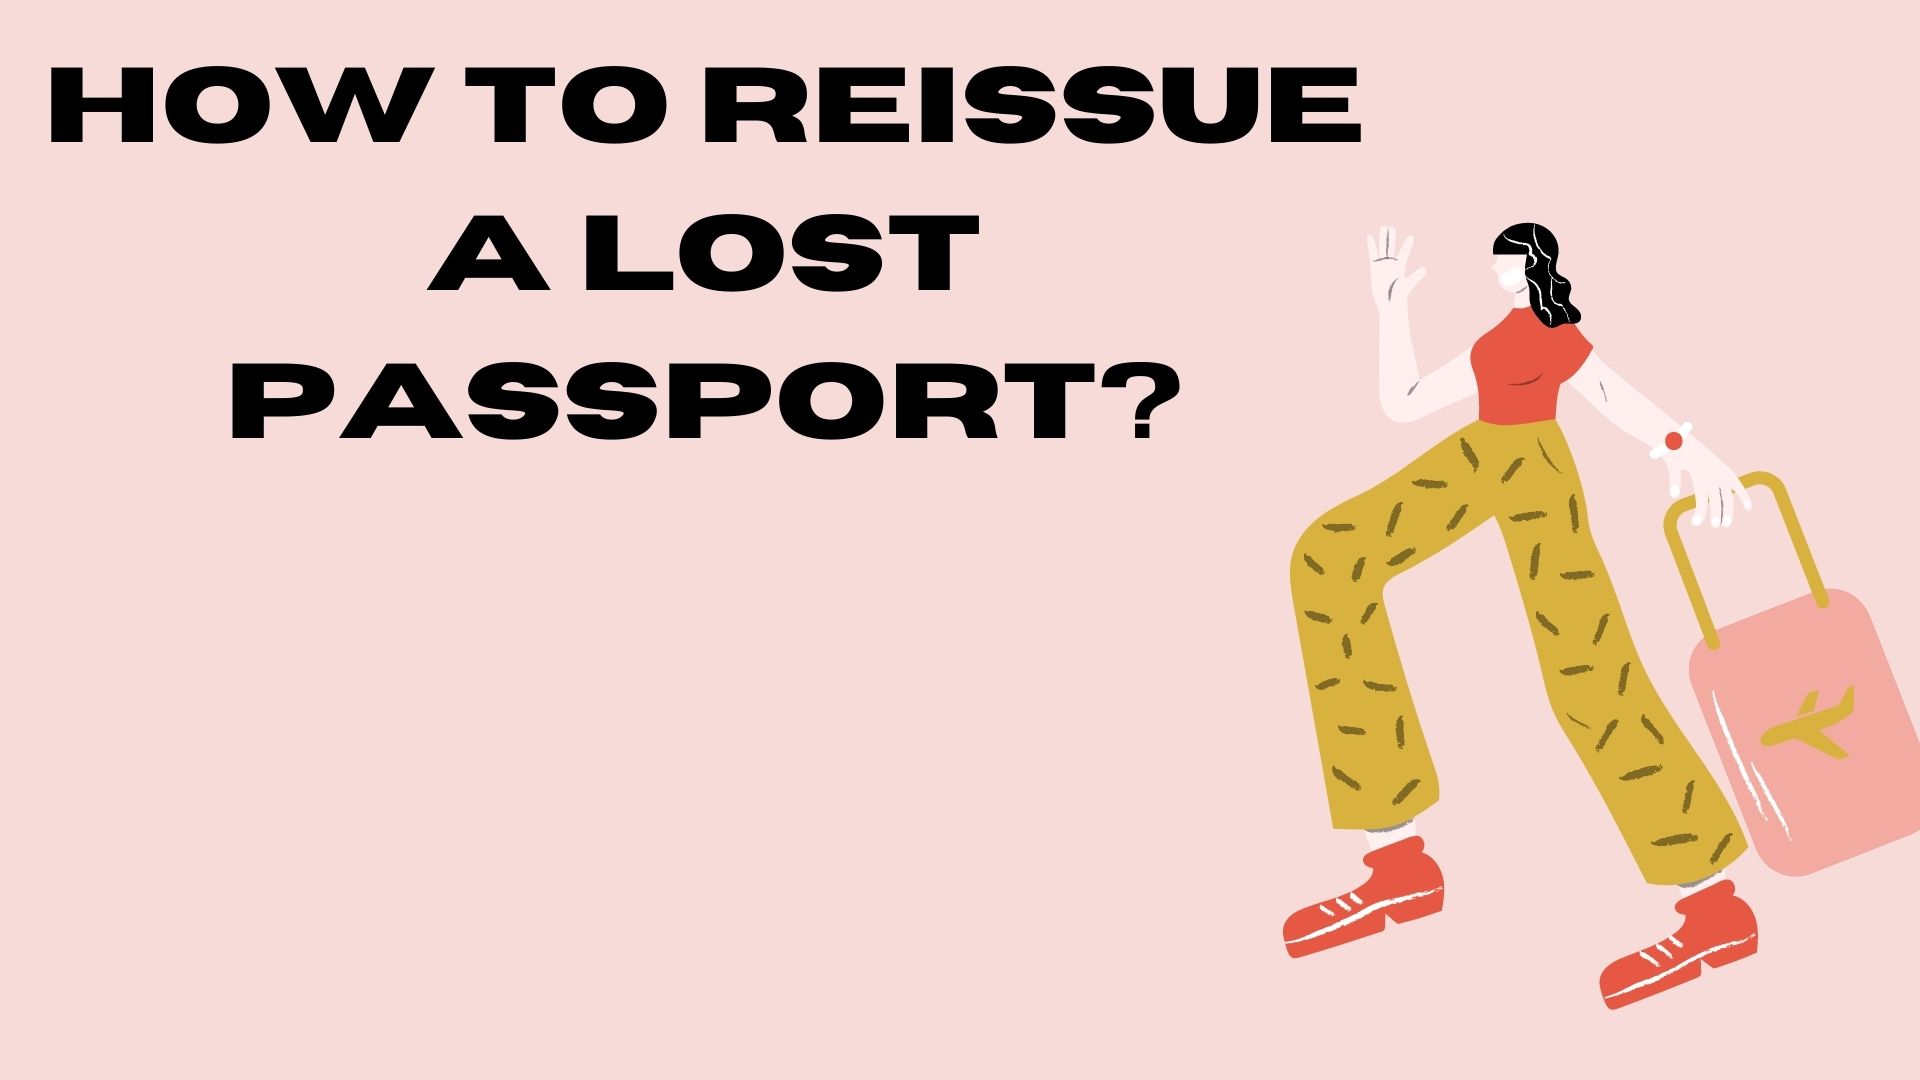 How to reissue a lost passport?